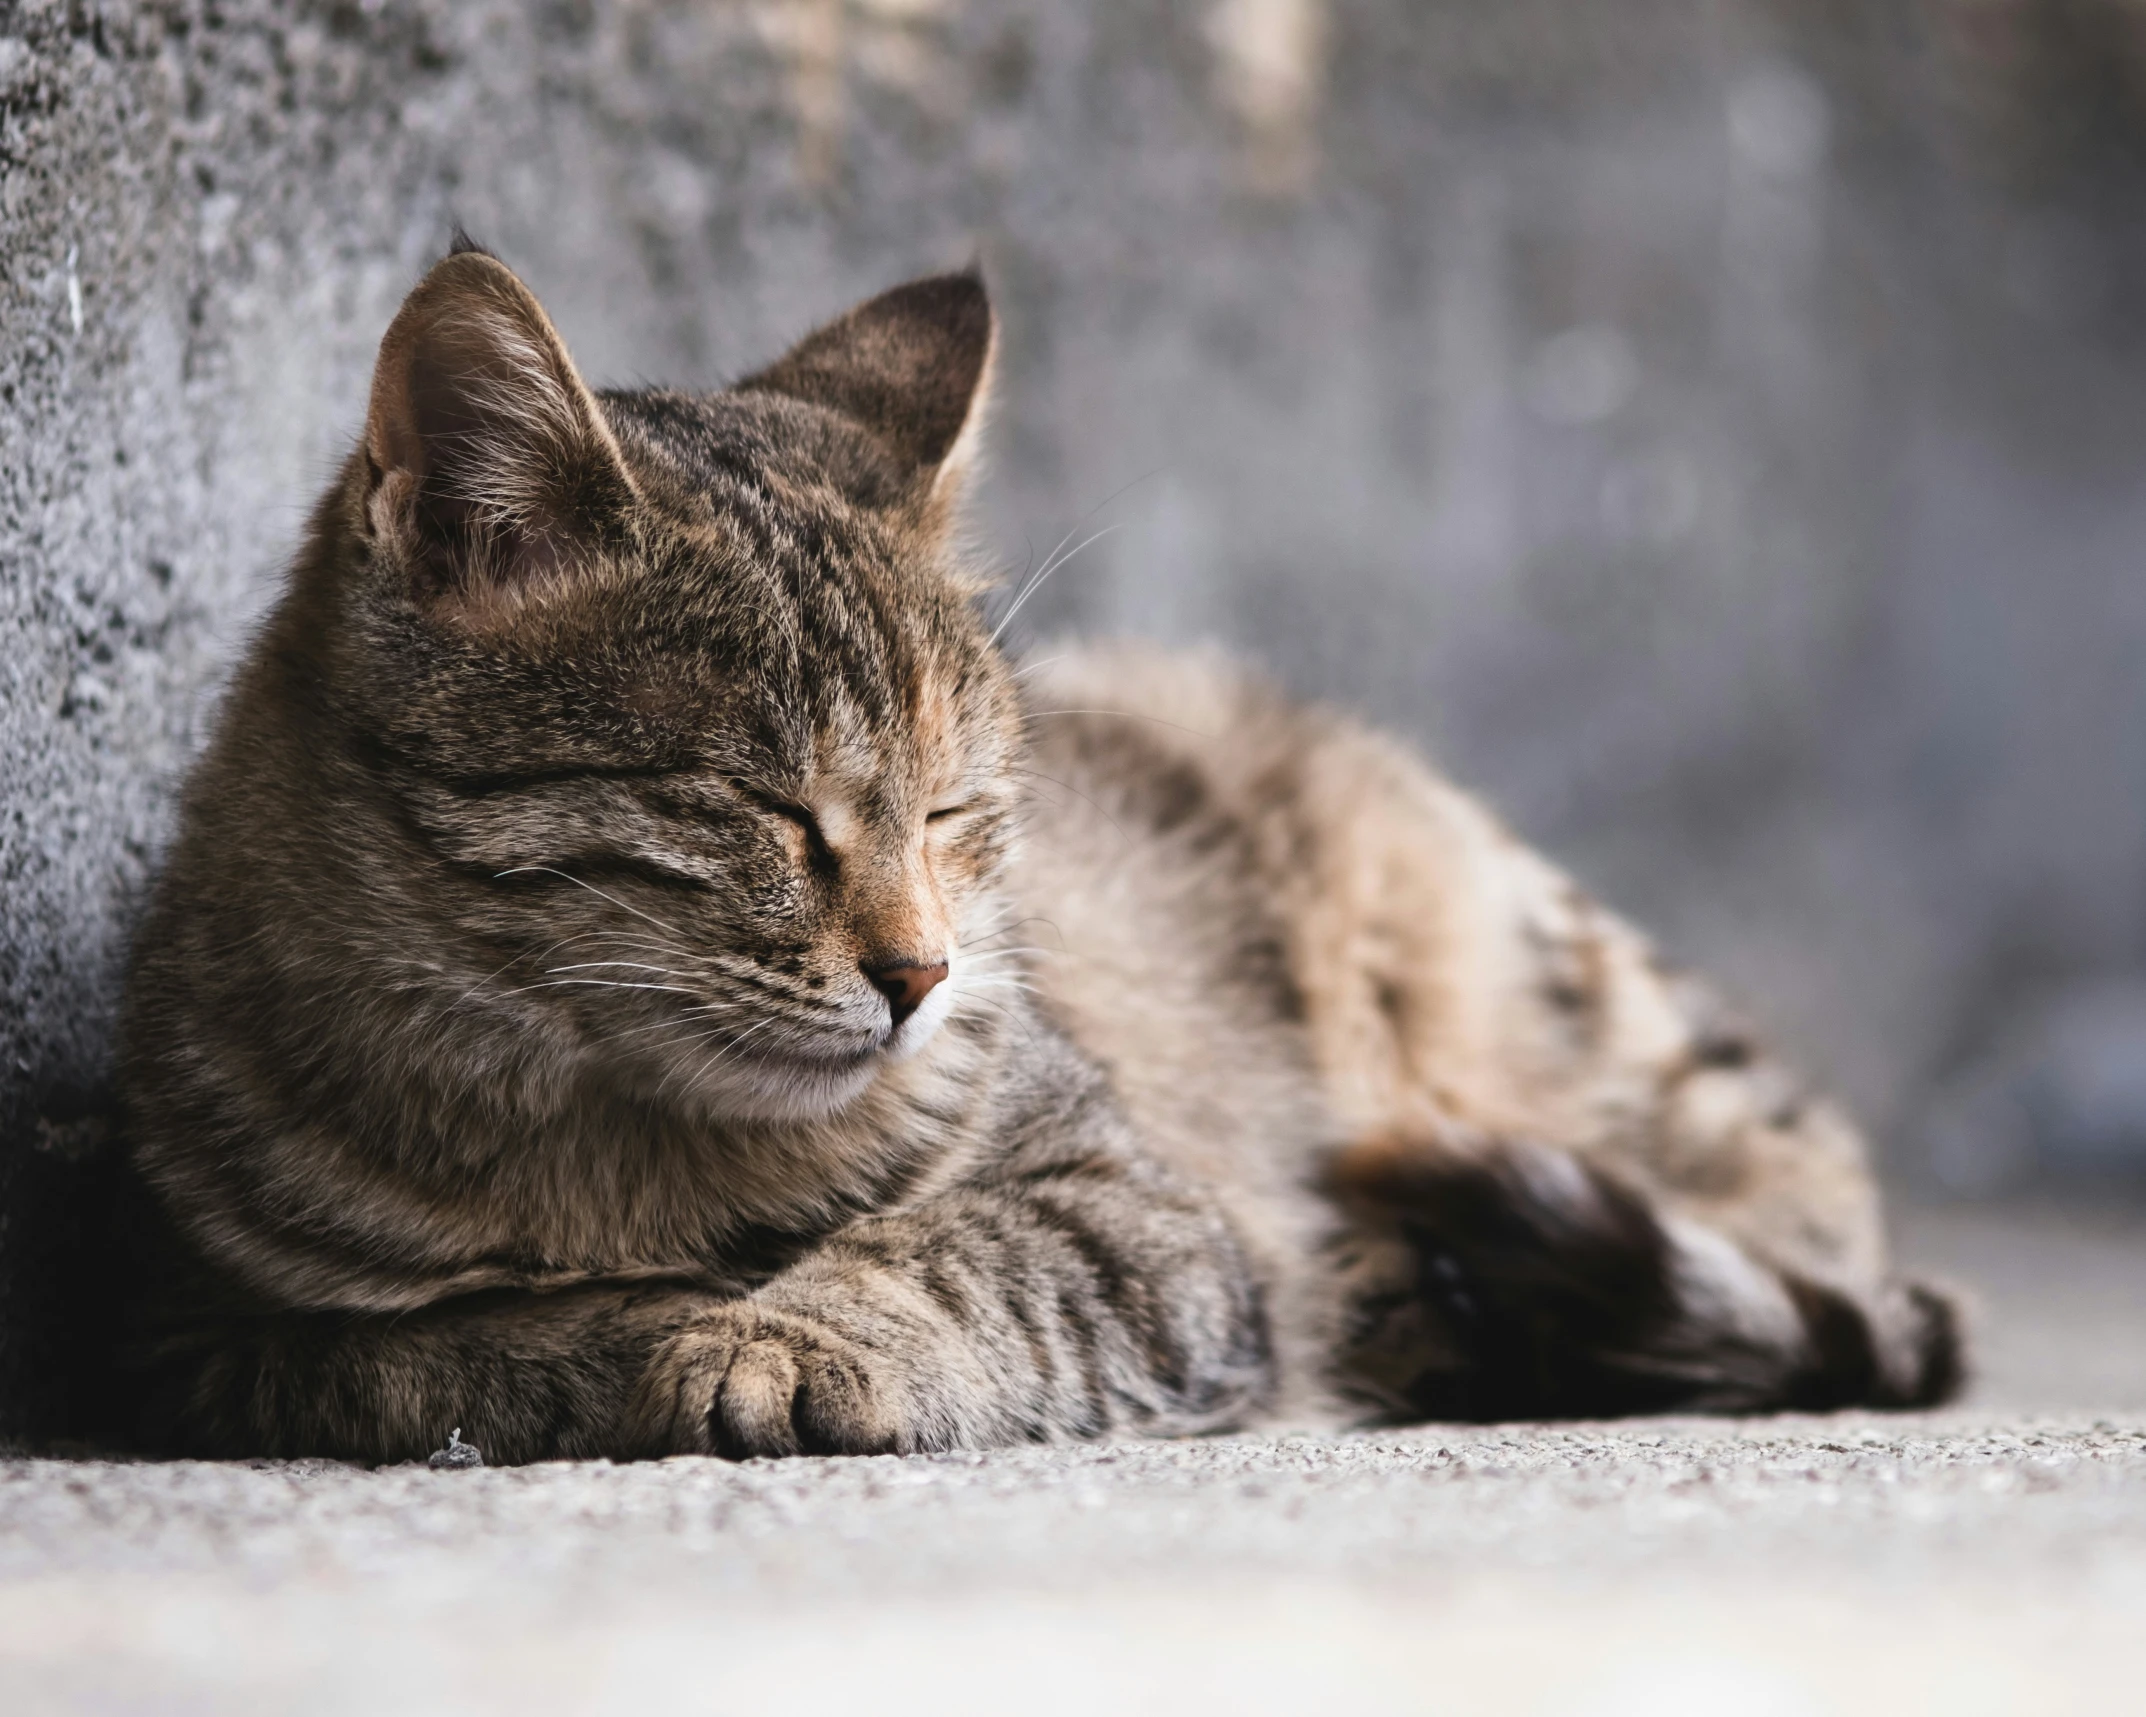 a cat sleeping on the ground next to a wall